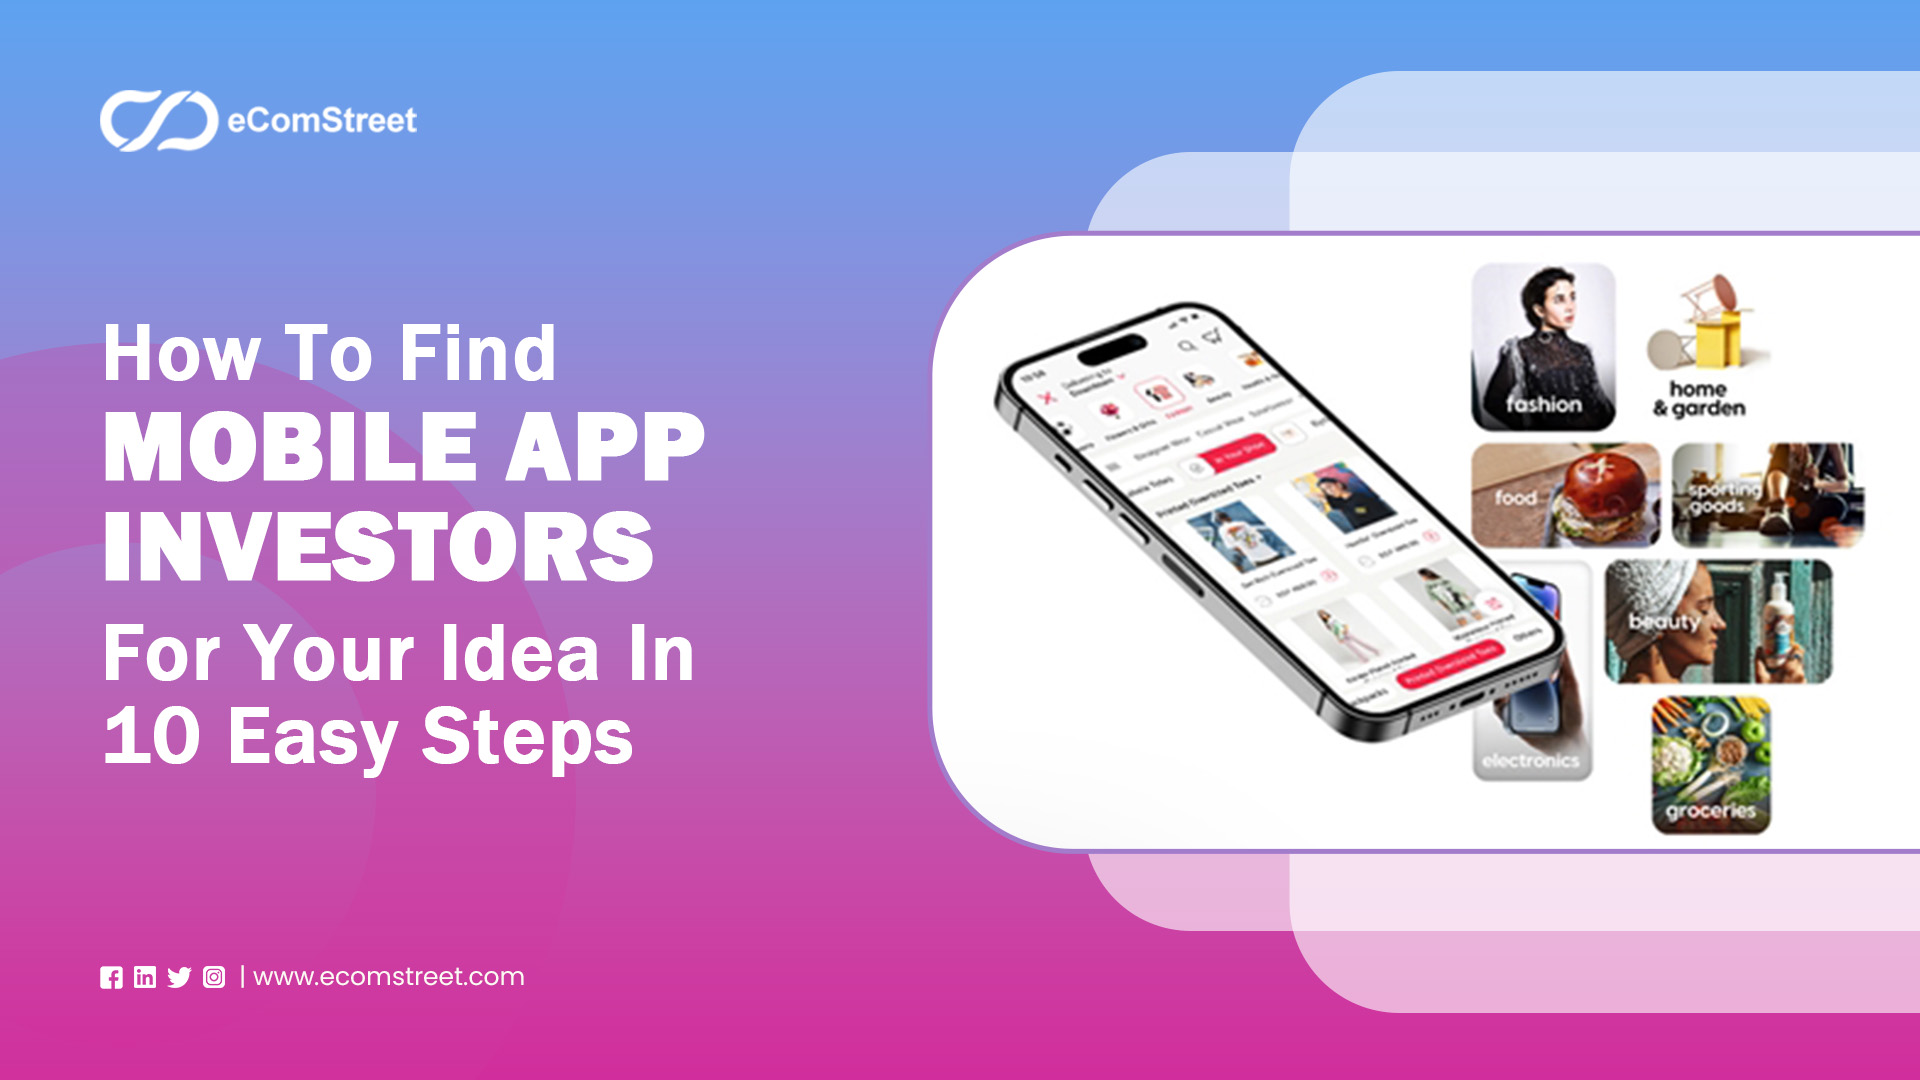 How to Find Mobile App Investors for Your Idea in 10 Easy Steps